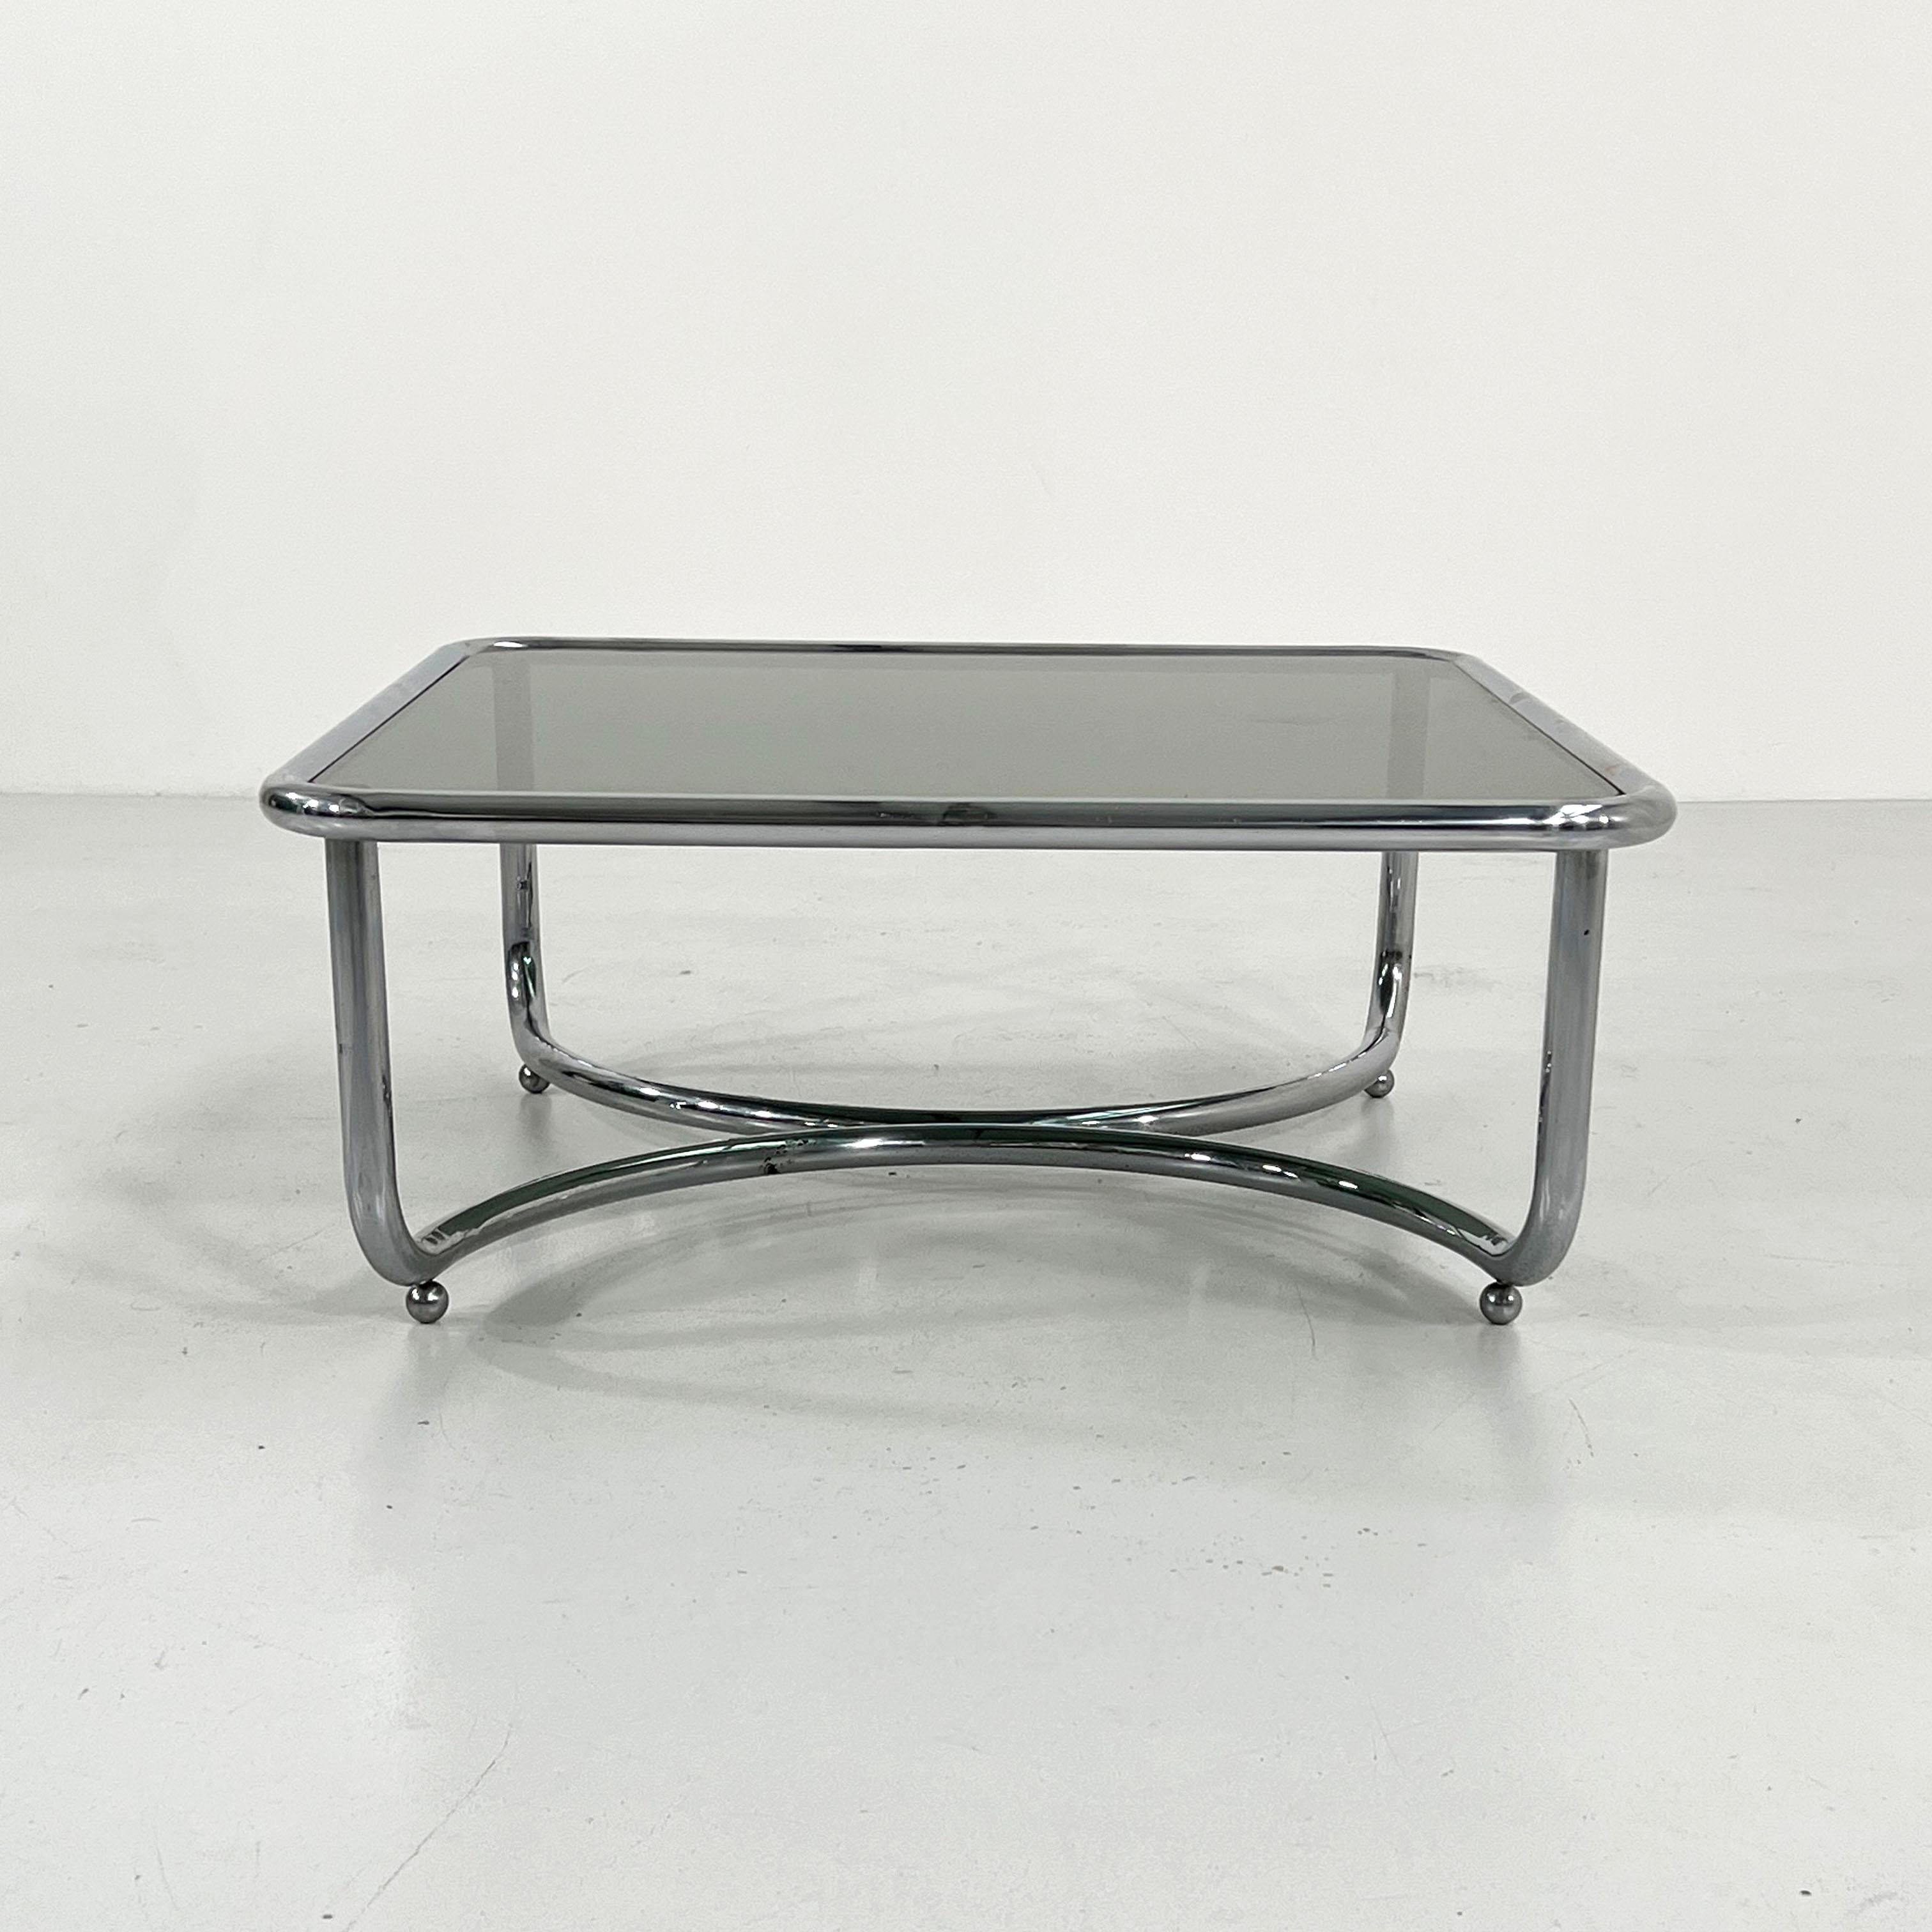 Metal Locus Solus Coffee Table by Gae Aulenti for Poltronova, 1970s